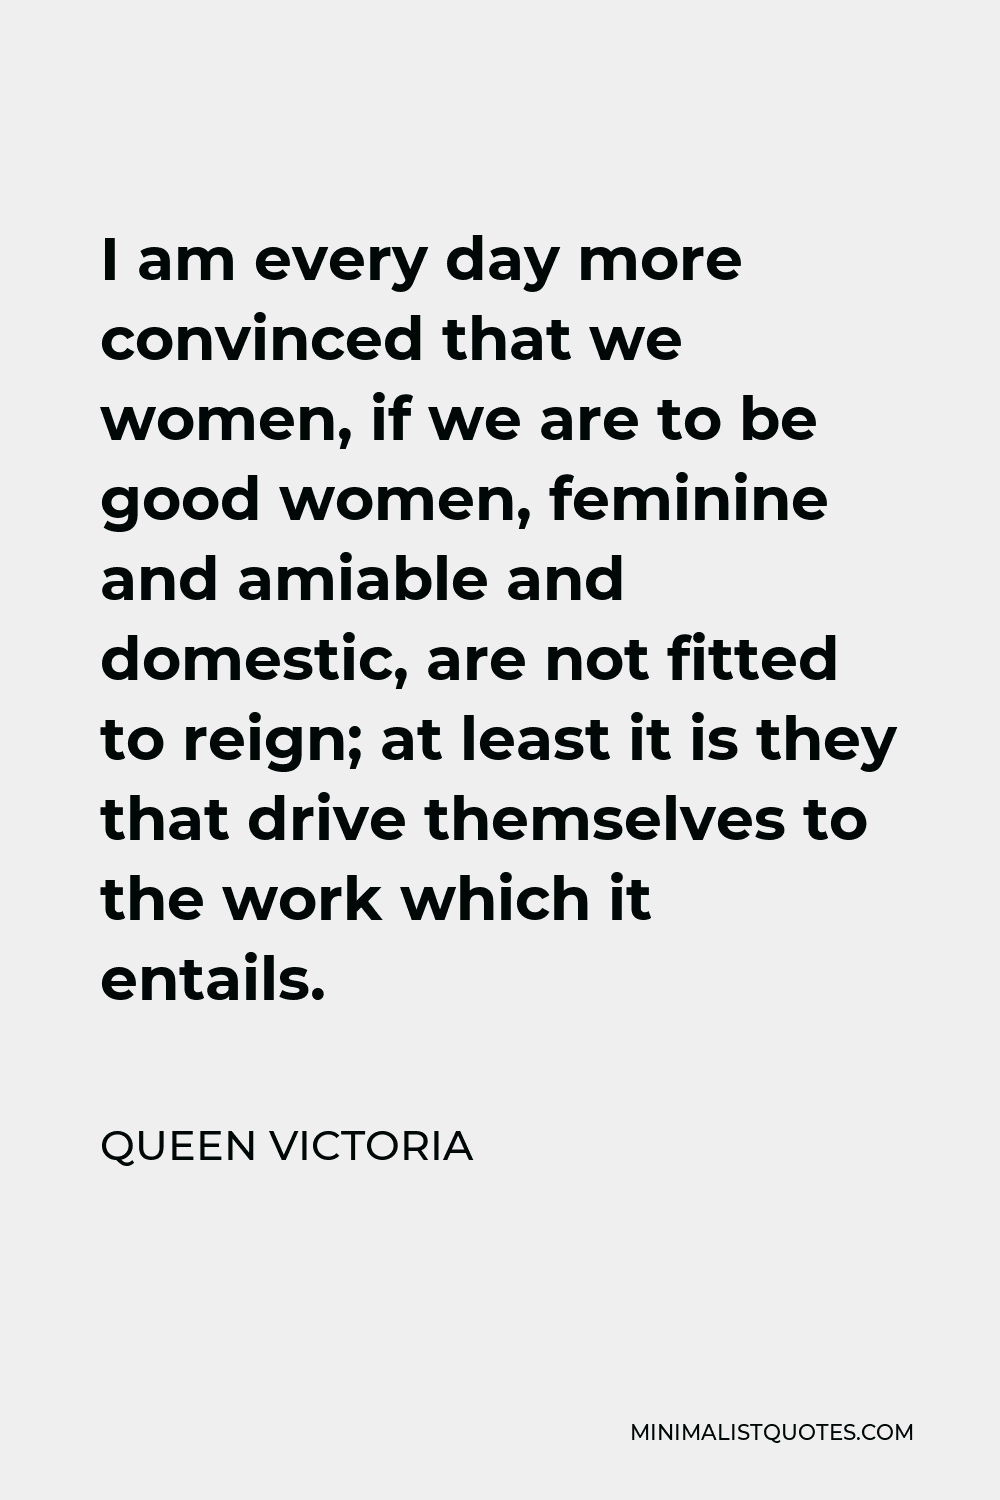 Queen Victoria Quote - I am every day more convinced that we women, if we are to be good women, feminine and amiable and domestic, are not fitted to reign; at least it is they that drive themselves to the work which it entails.